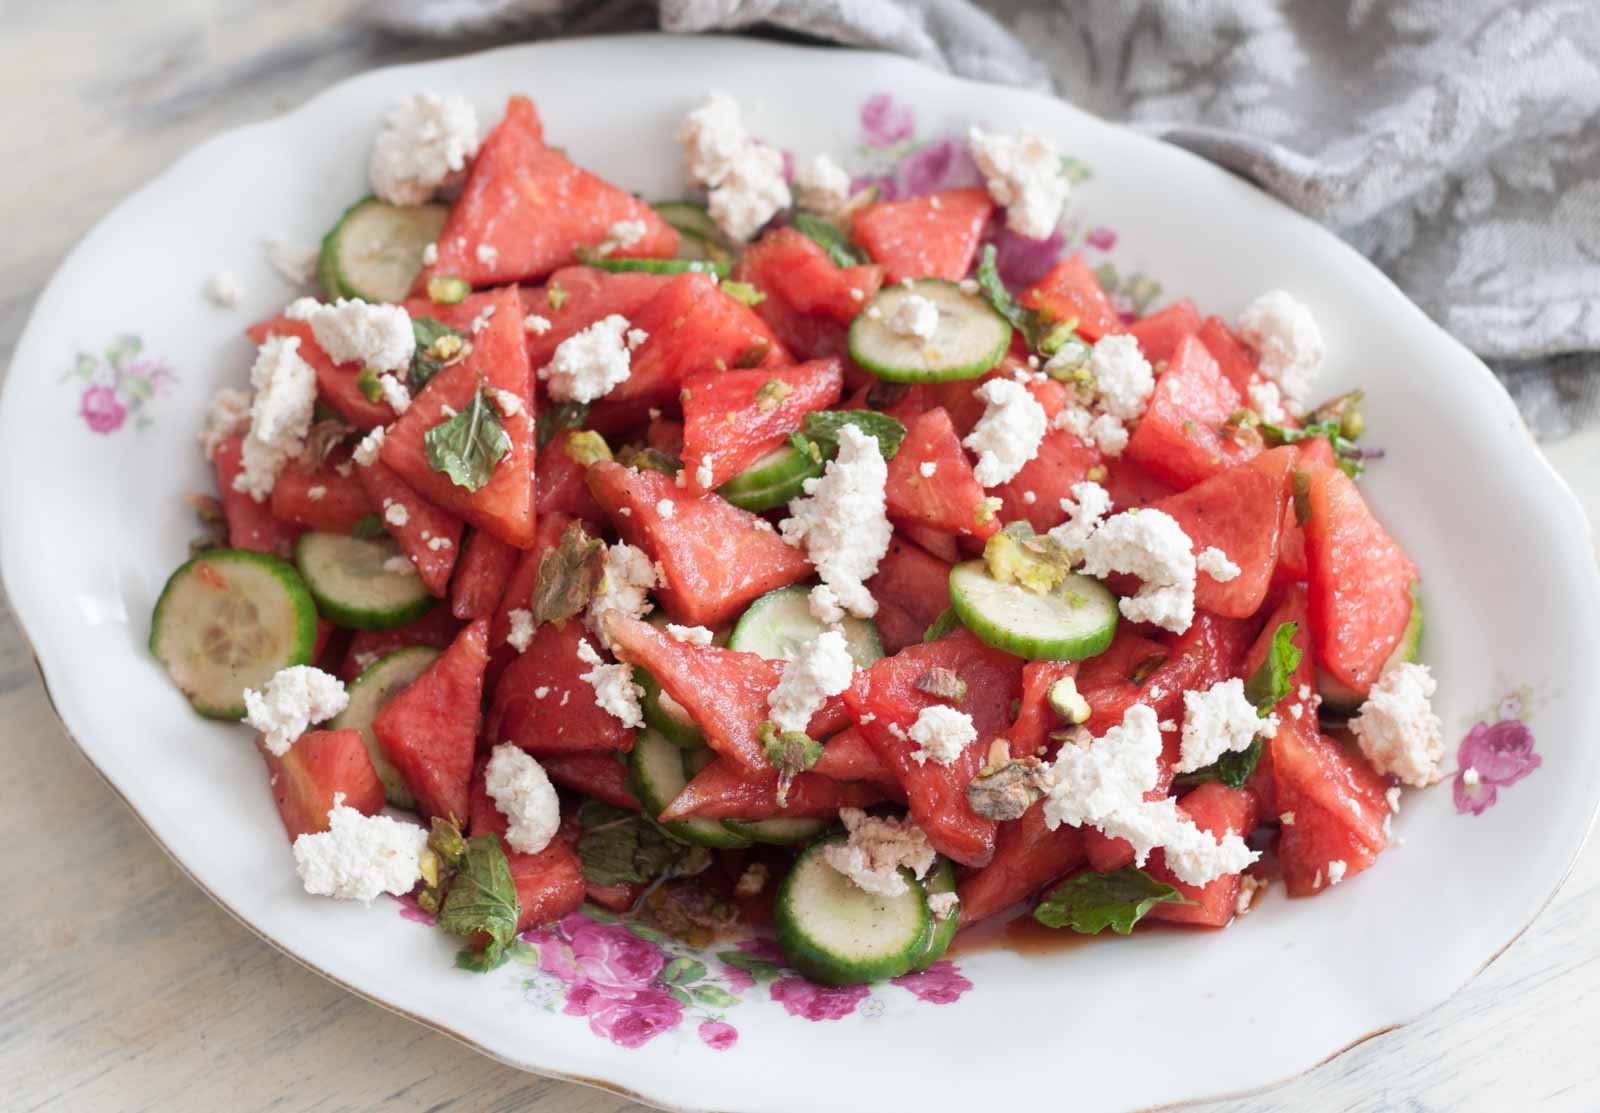 Watermelon, Chena, Cucumber With Soy Dressing Recipe